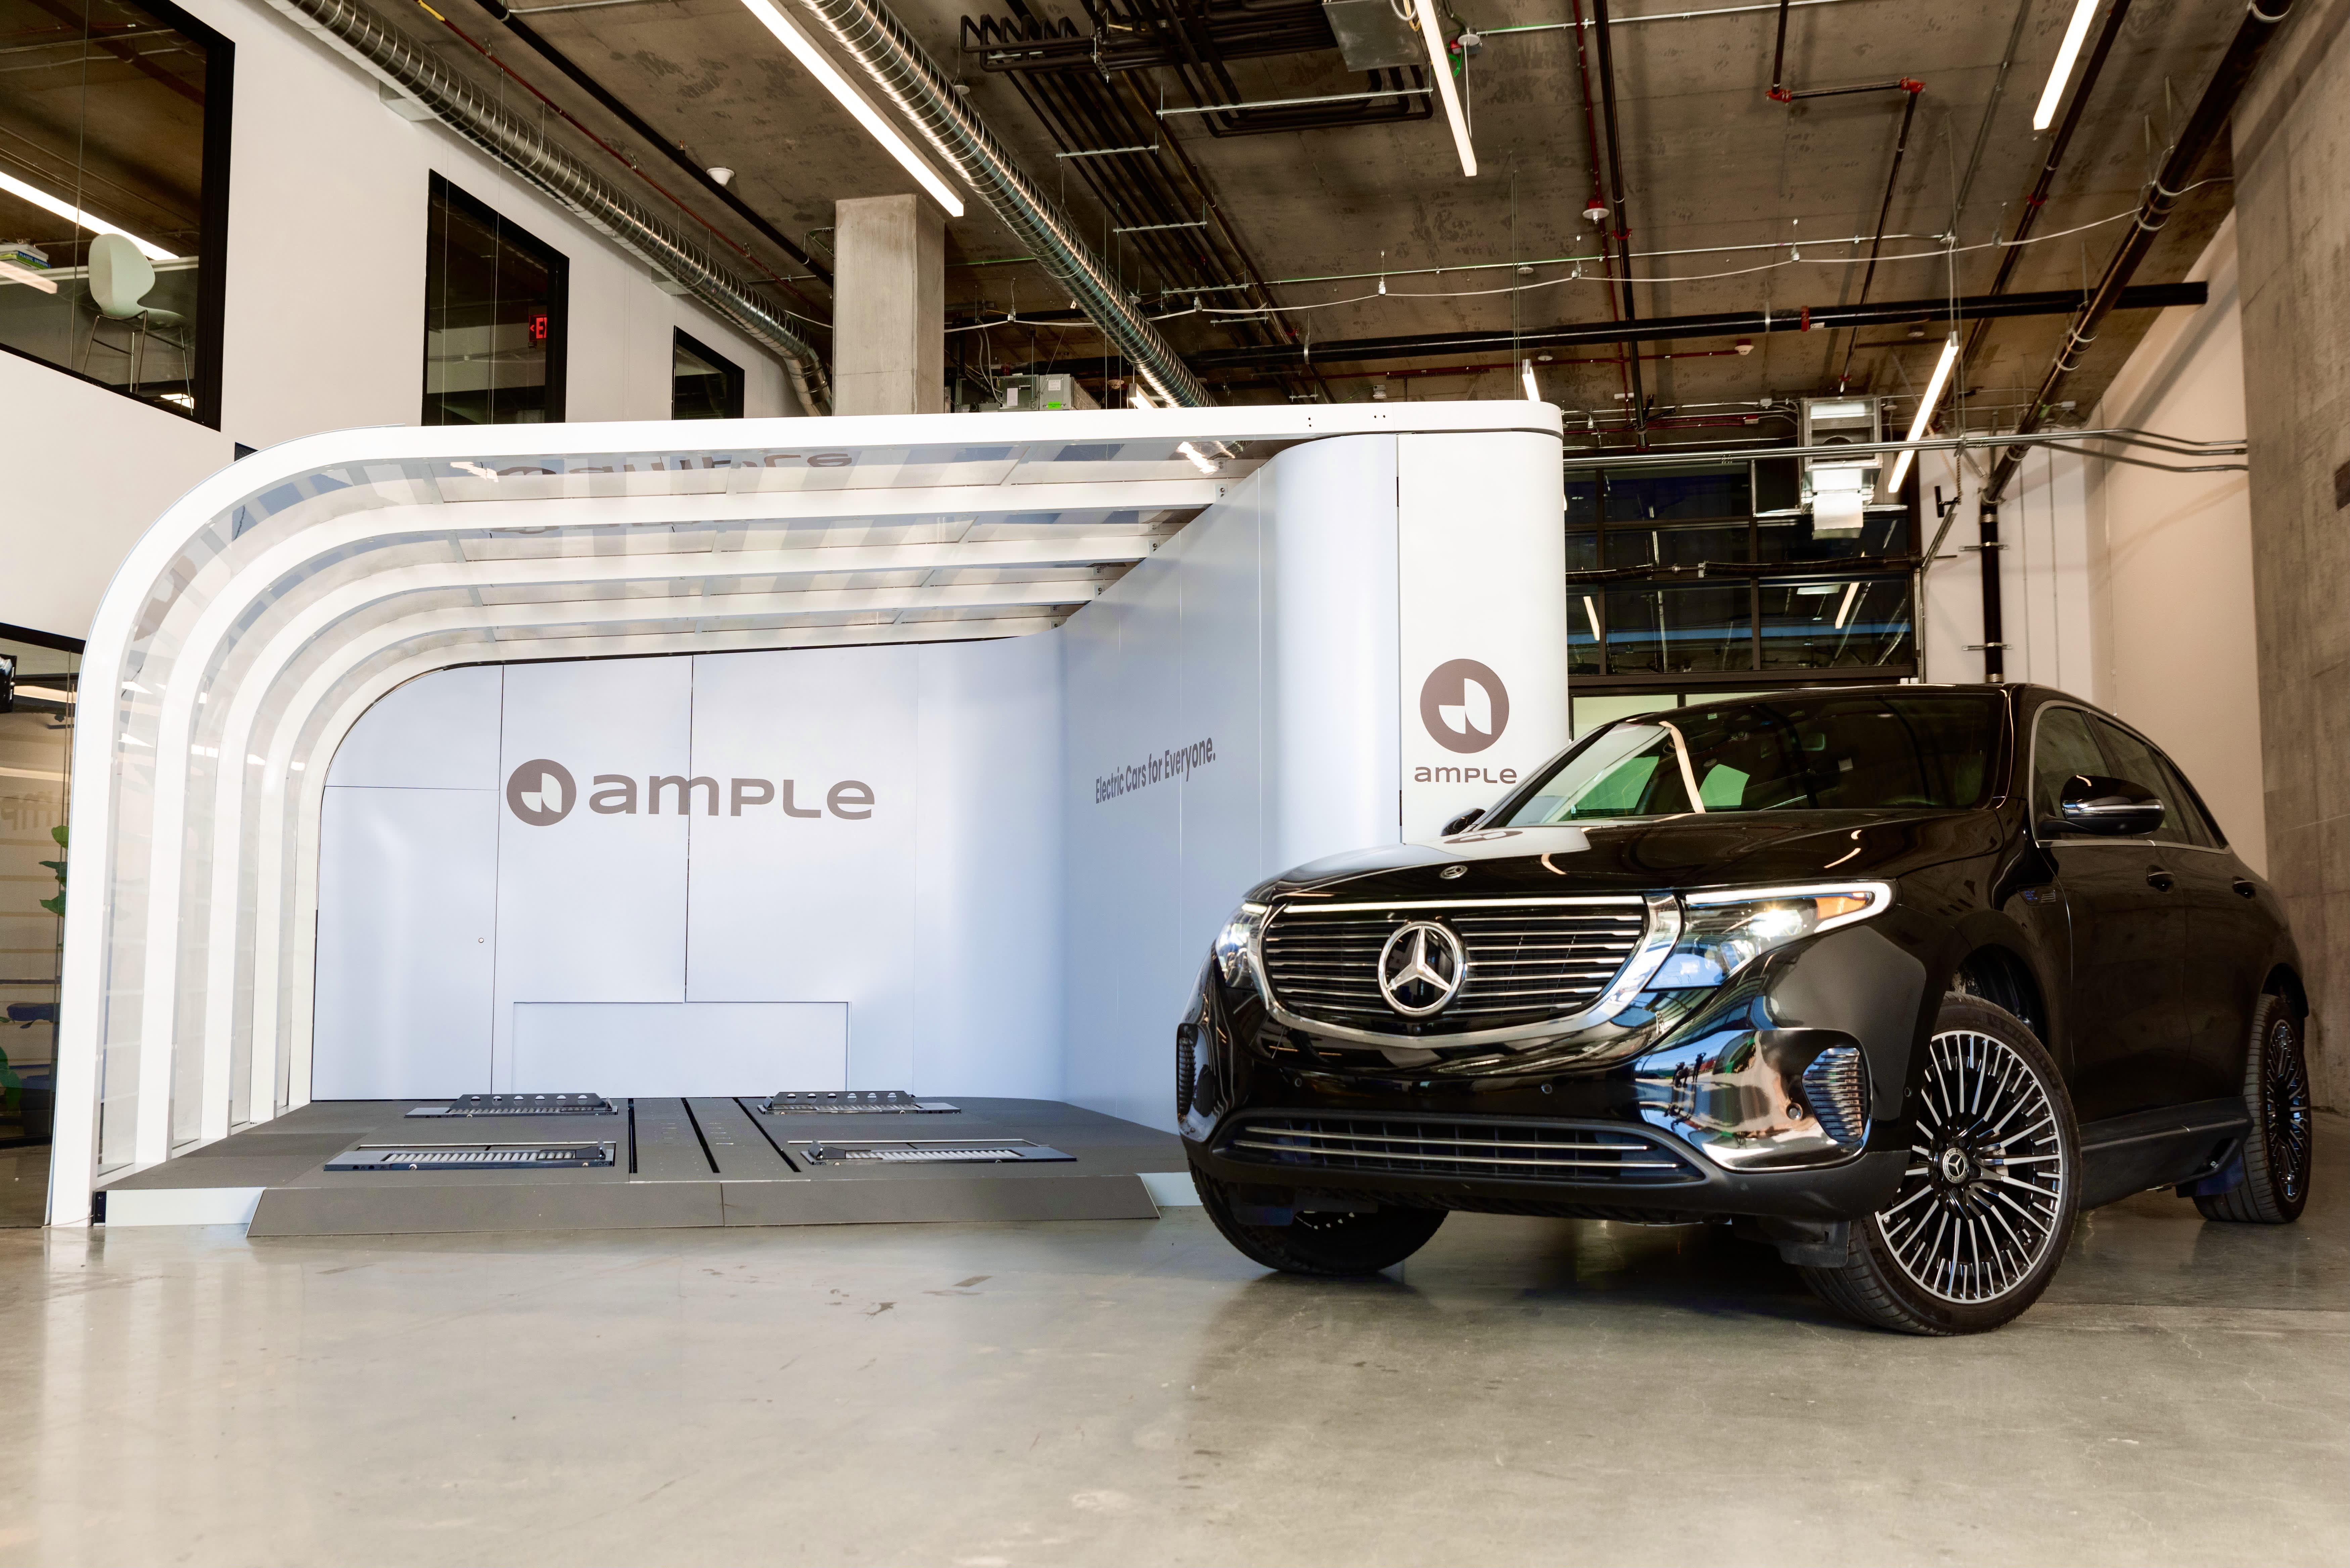 Ample opens 5 EV battery change stations for Uber Bay Area drivers